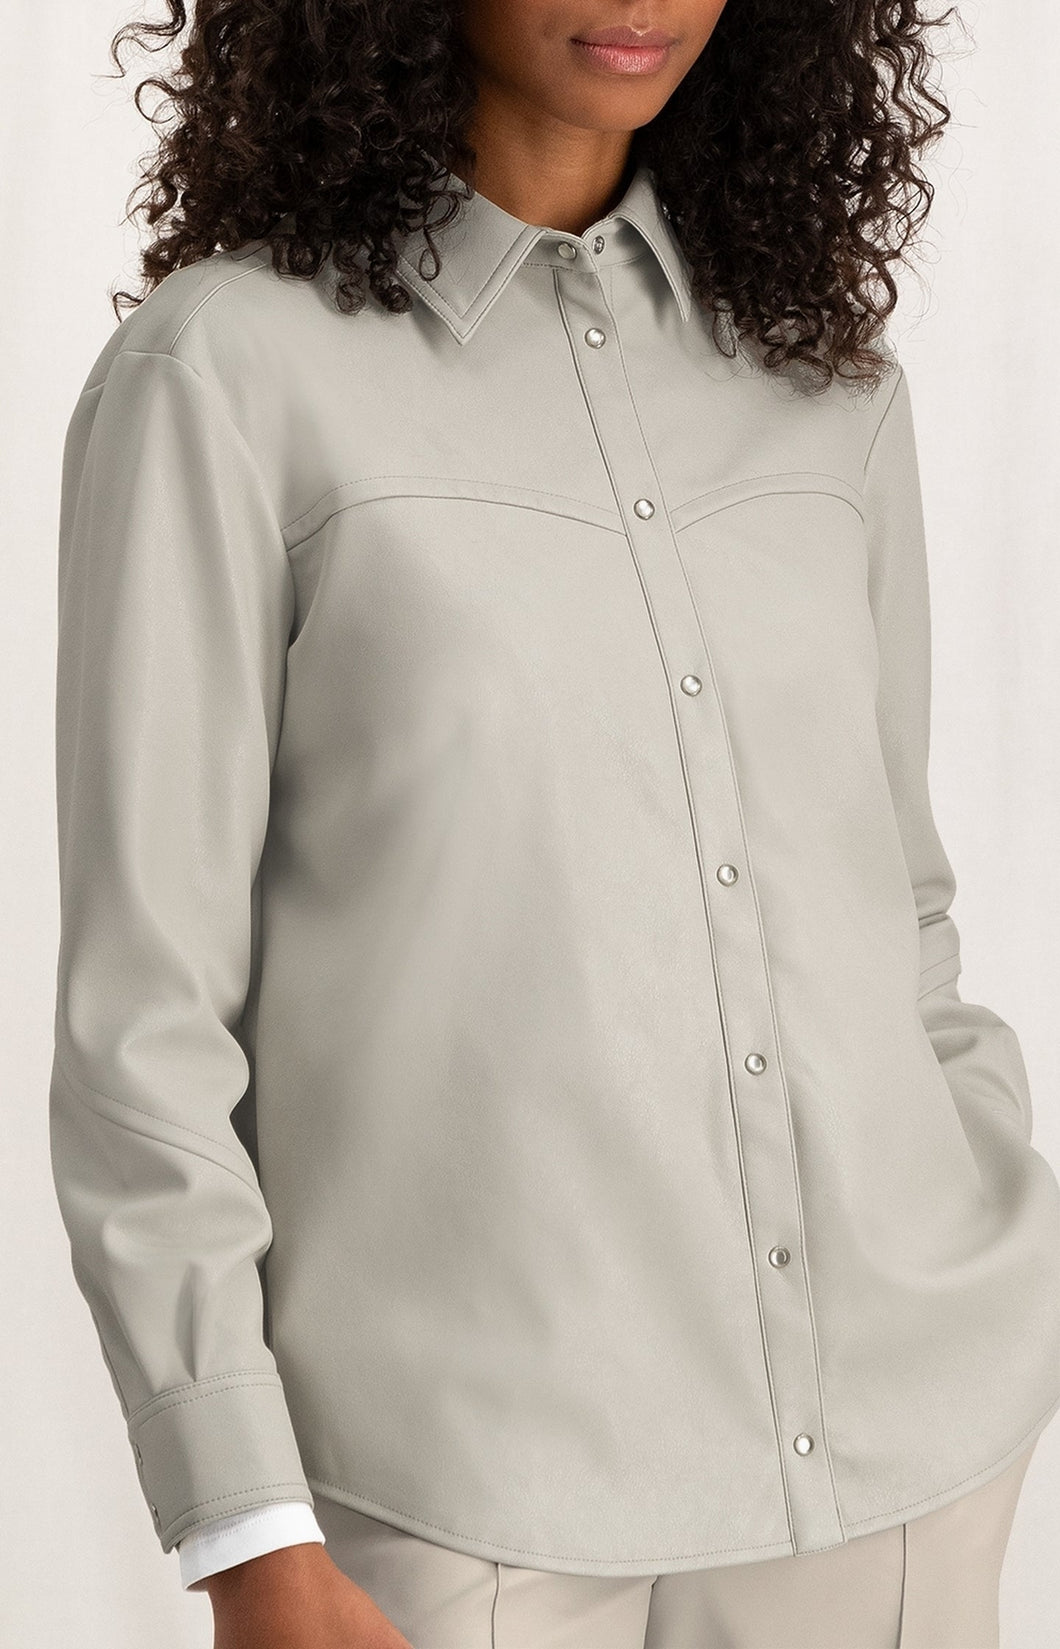 Faux leather blouse with collar, long sleeves and buttons - Silver Lining Beige - Type: closeup